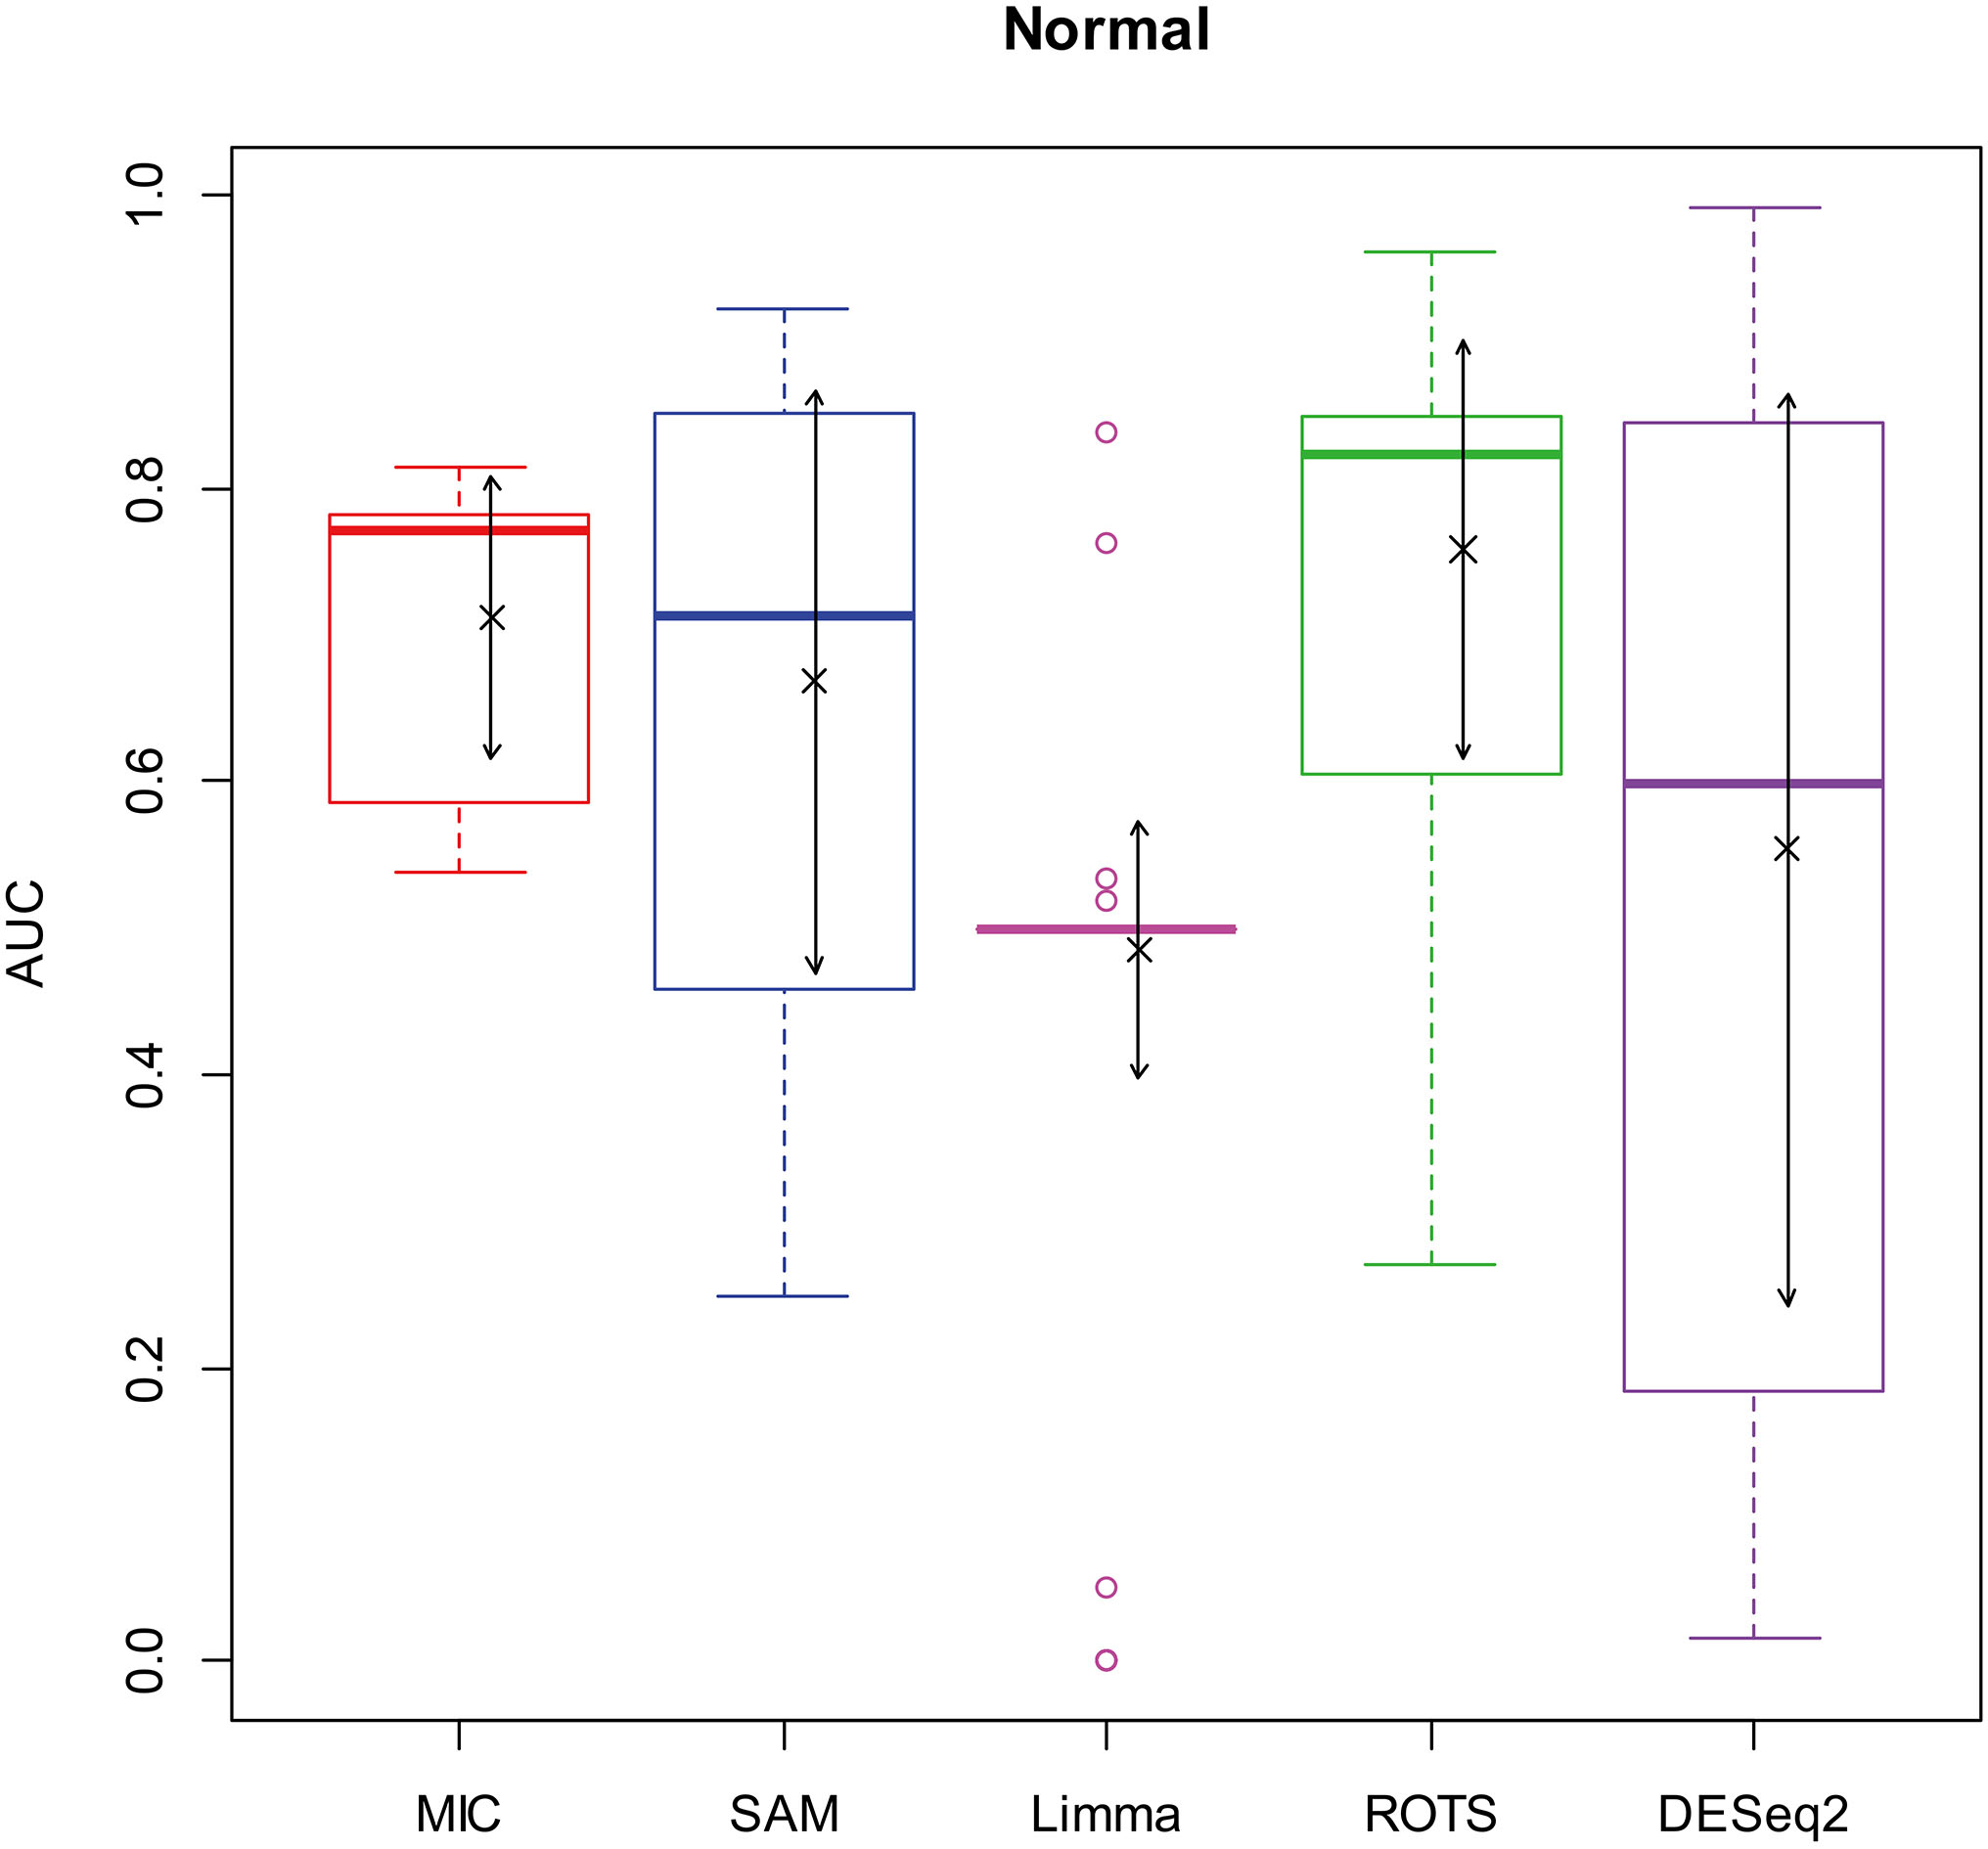 AUC boxplot on normal data. “×”s are the means. Bidirectional arrows represent ± 1 σ.